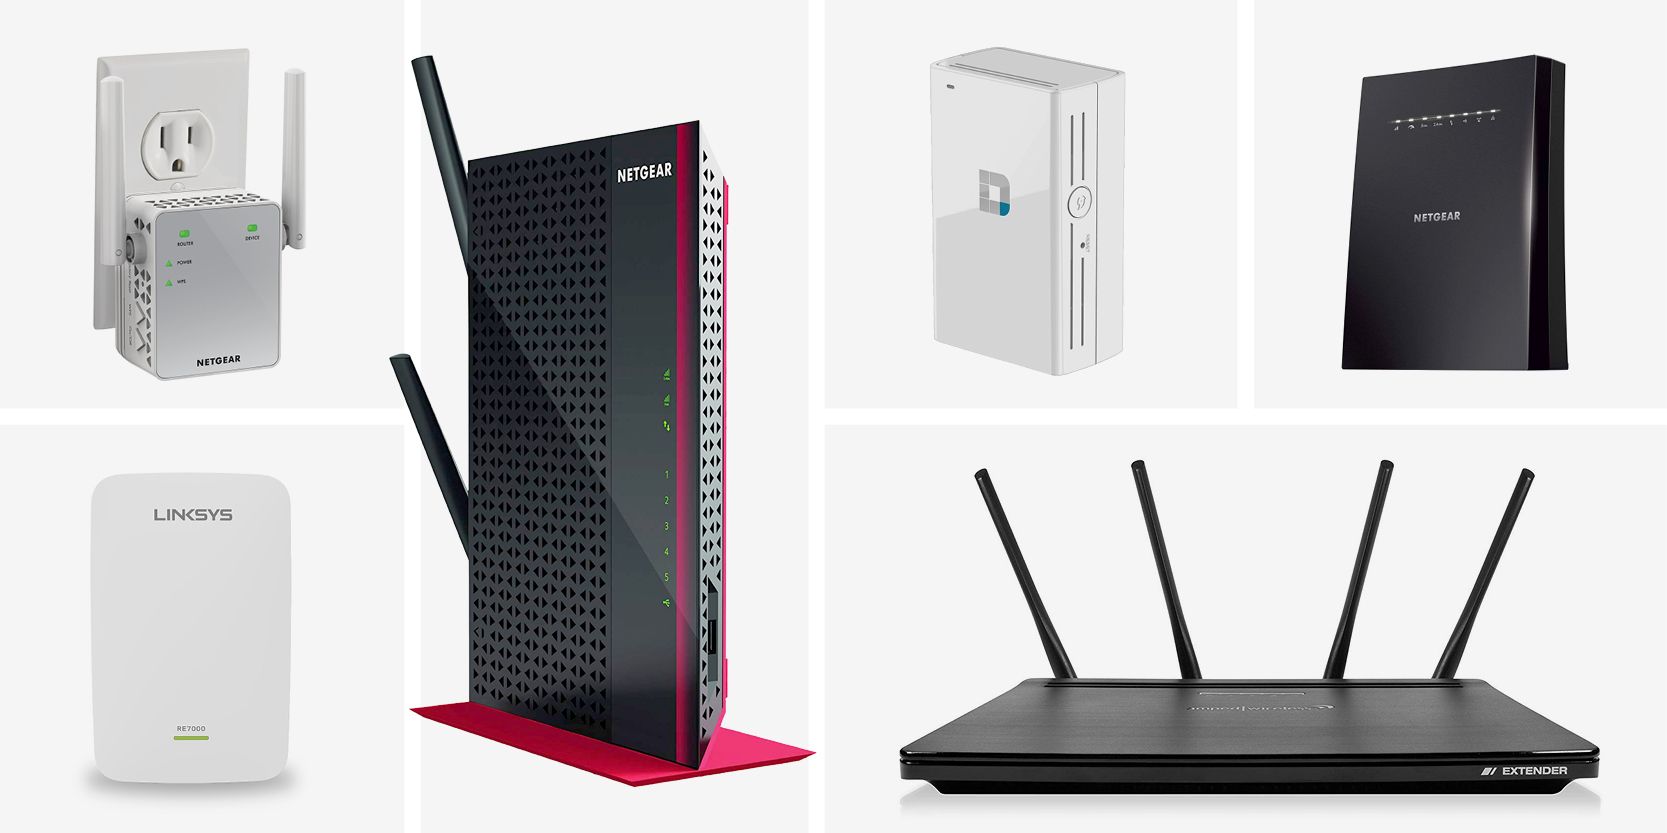 Best Wi-Fi Repeaters/Range Extenders/Wi-Fi Boosters in India in 2020